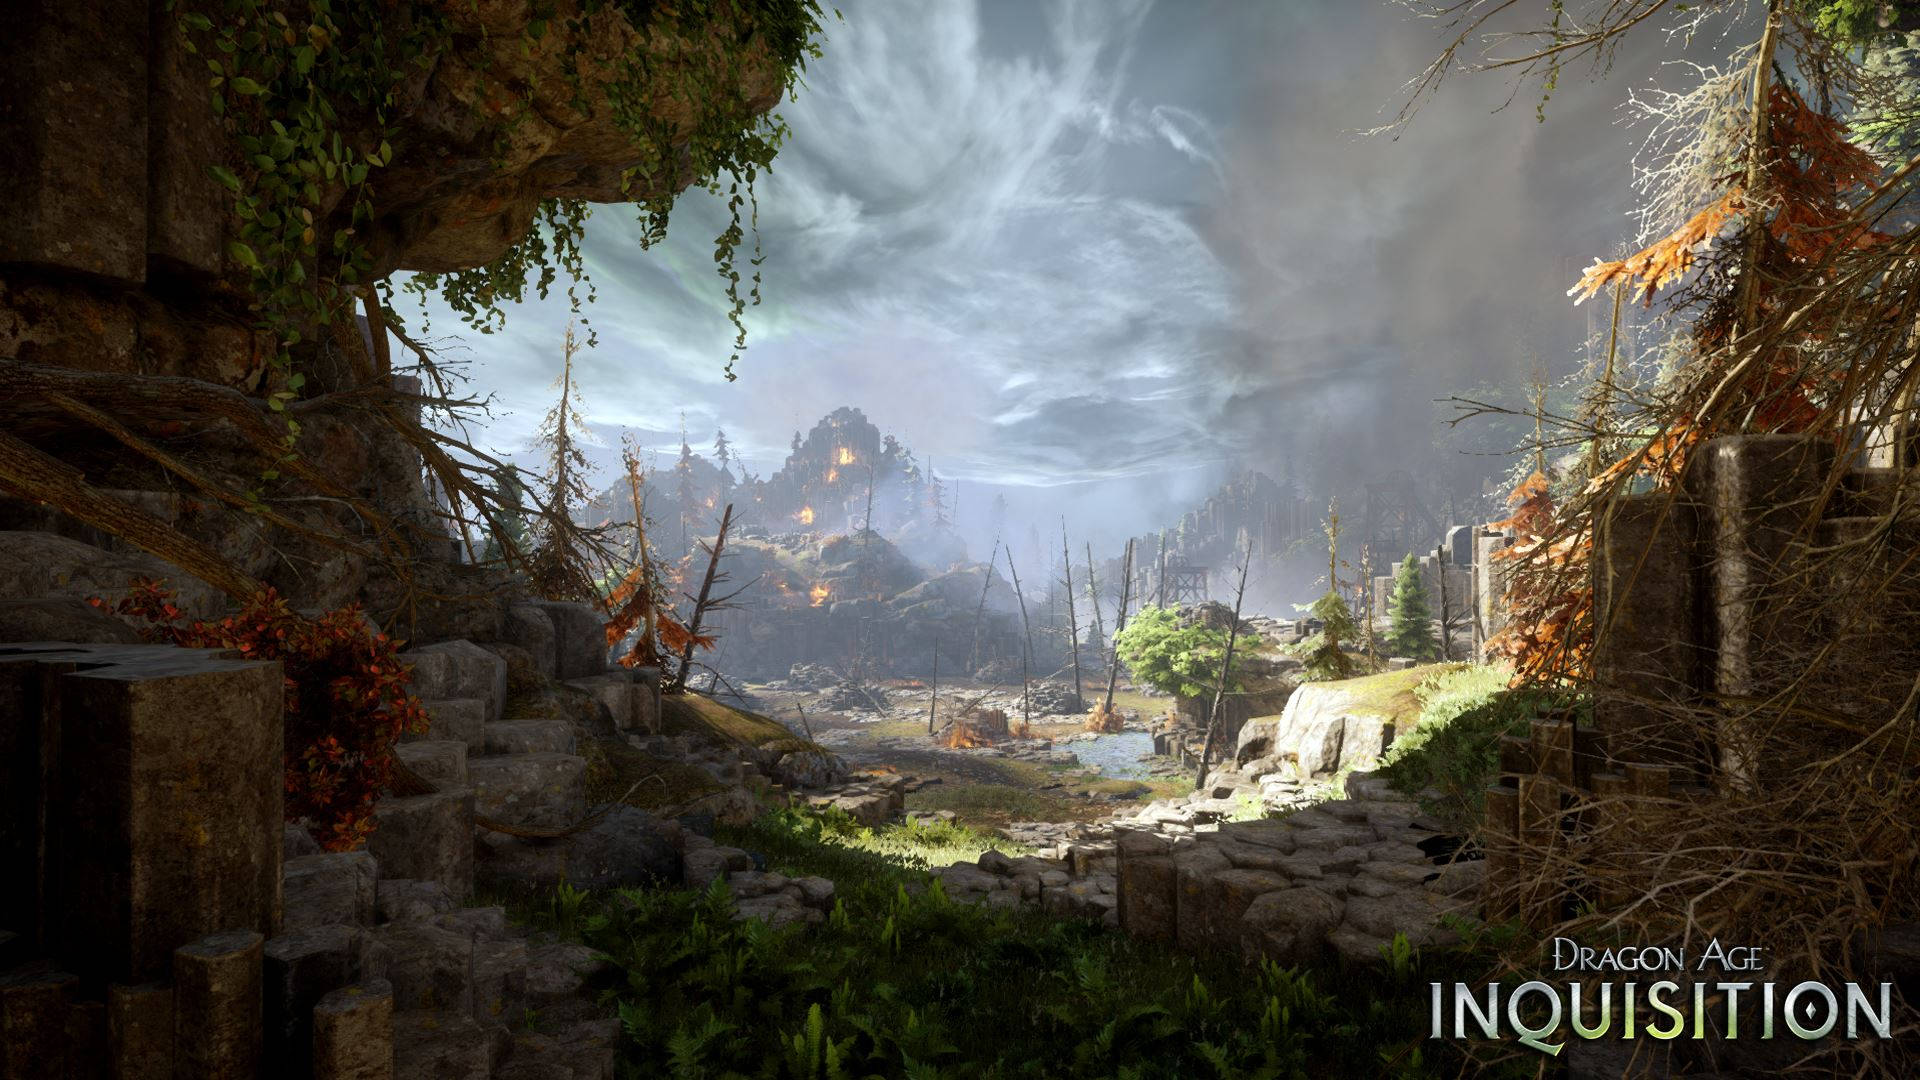 Ruins Forest Dragon Age Inquisition Wallpaper